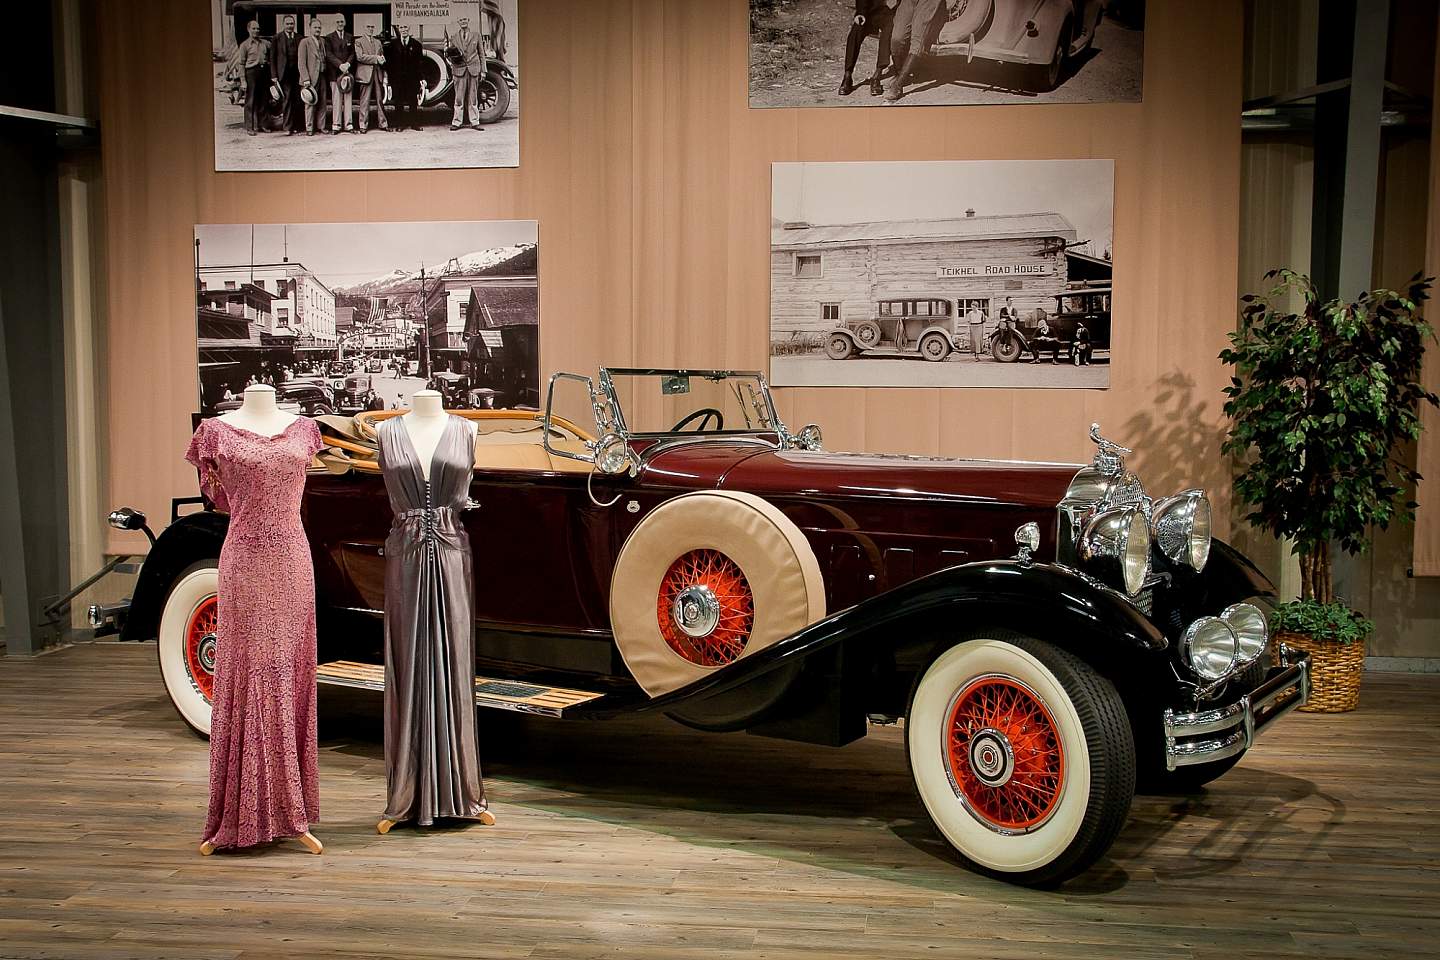 Two vintages dresses stand on display in front of a black and red vintage car with old photos displayed on the wall behind it